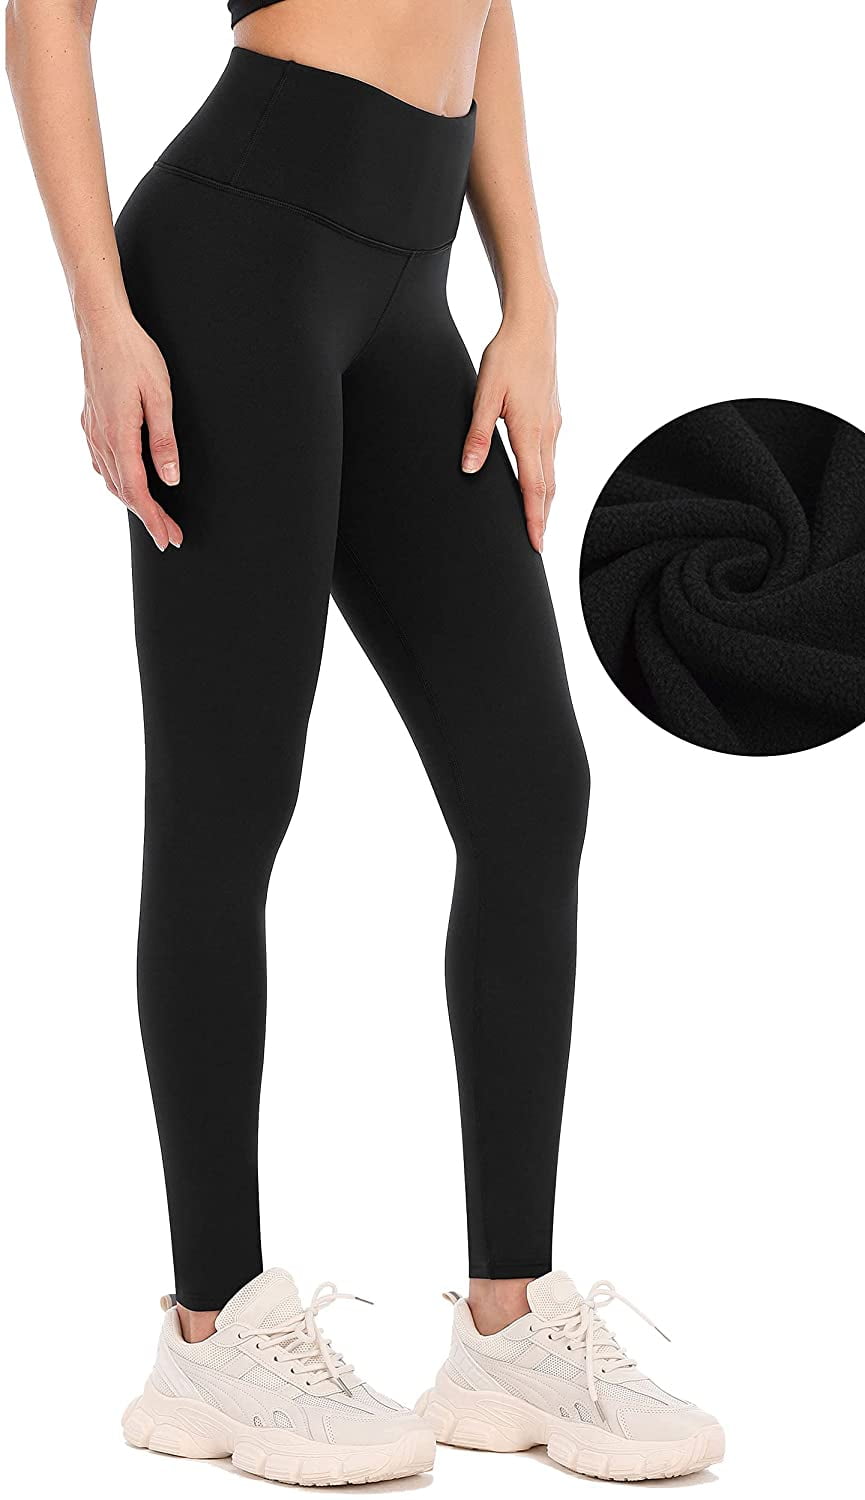 Fleece Lined Leggings Women Winter Thermal Insulated Leggings High Waist Workout  Yoga Pants with Pockets 